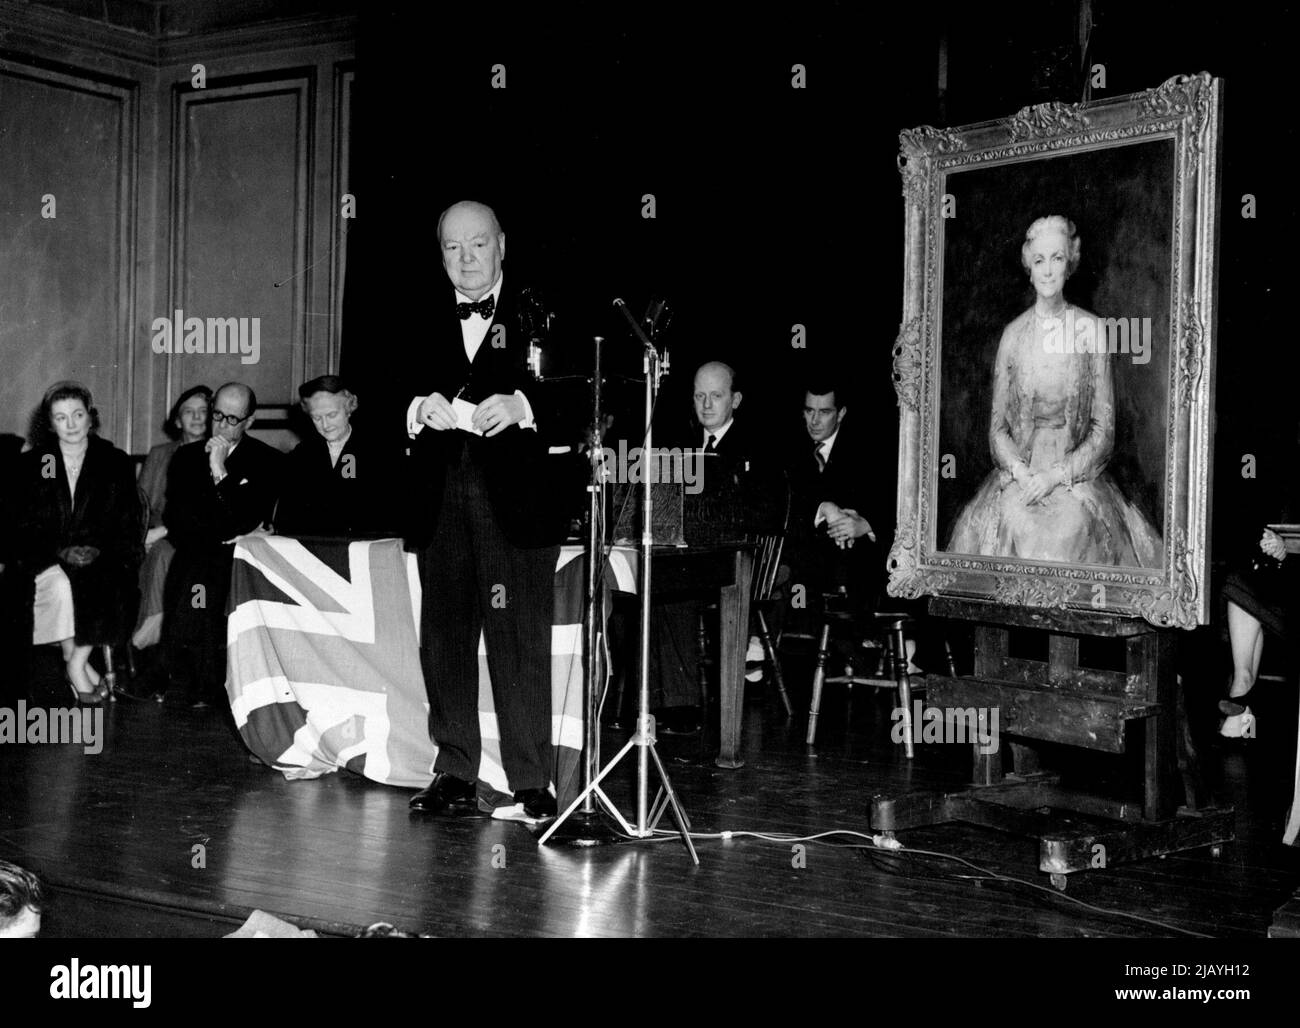 Presentation To Sir Winston Churchill: At the headquarters of the Woodford Conservatives Association to-night Sir Winston Churchill was presented with a portrait in oils of his wife Lady Churchill. It was for his 80th birthday which is on November 30th.....This picture shows him speaking at Woodford to-night after the presentation. November 23, 1954. (Photo by Daily Mail Contract Picture). Stock Photo